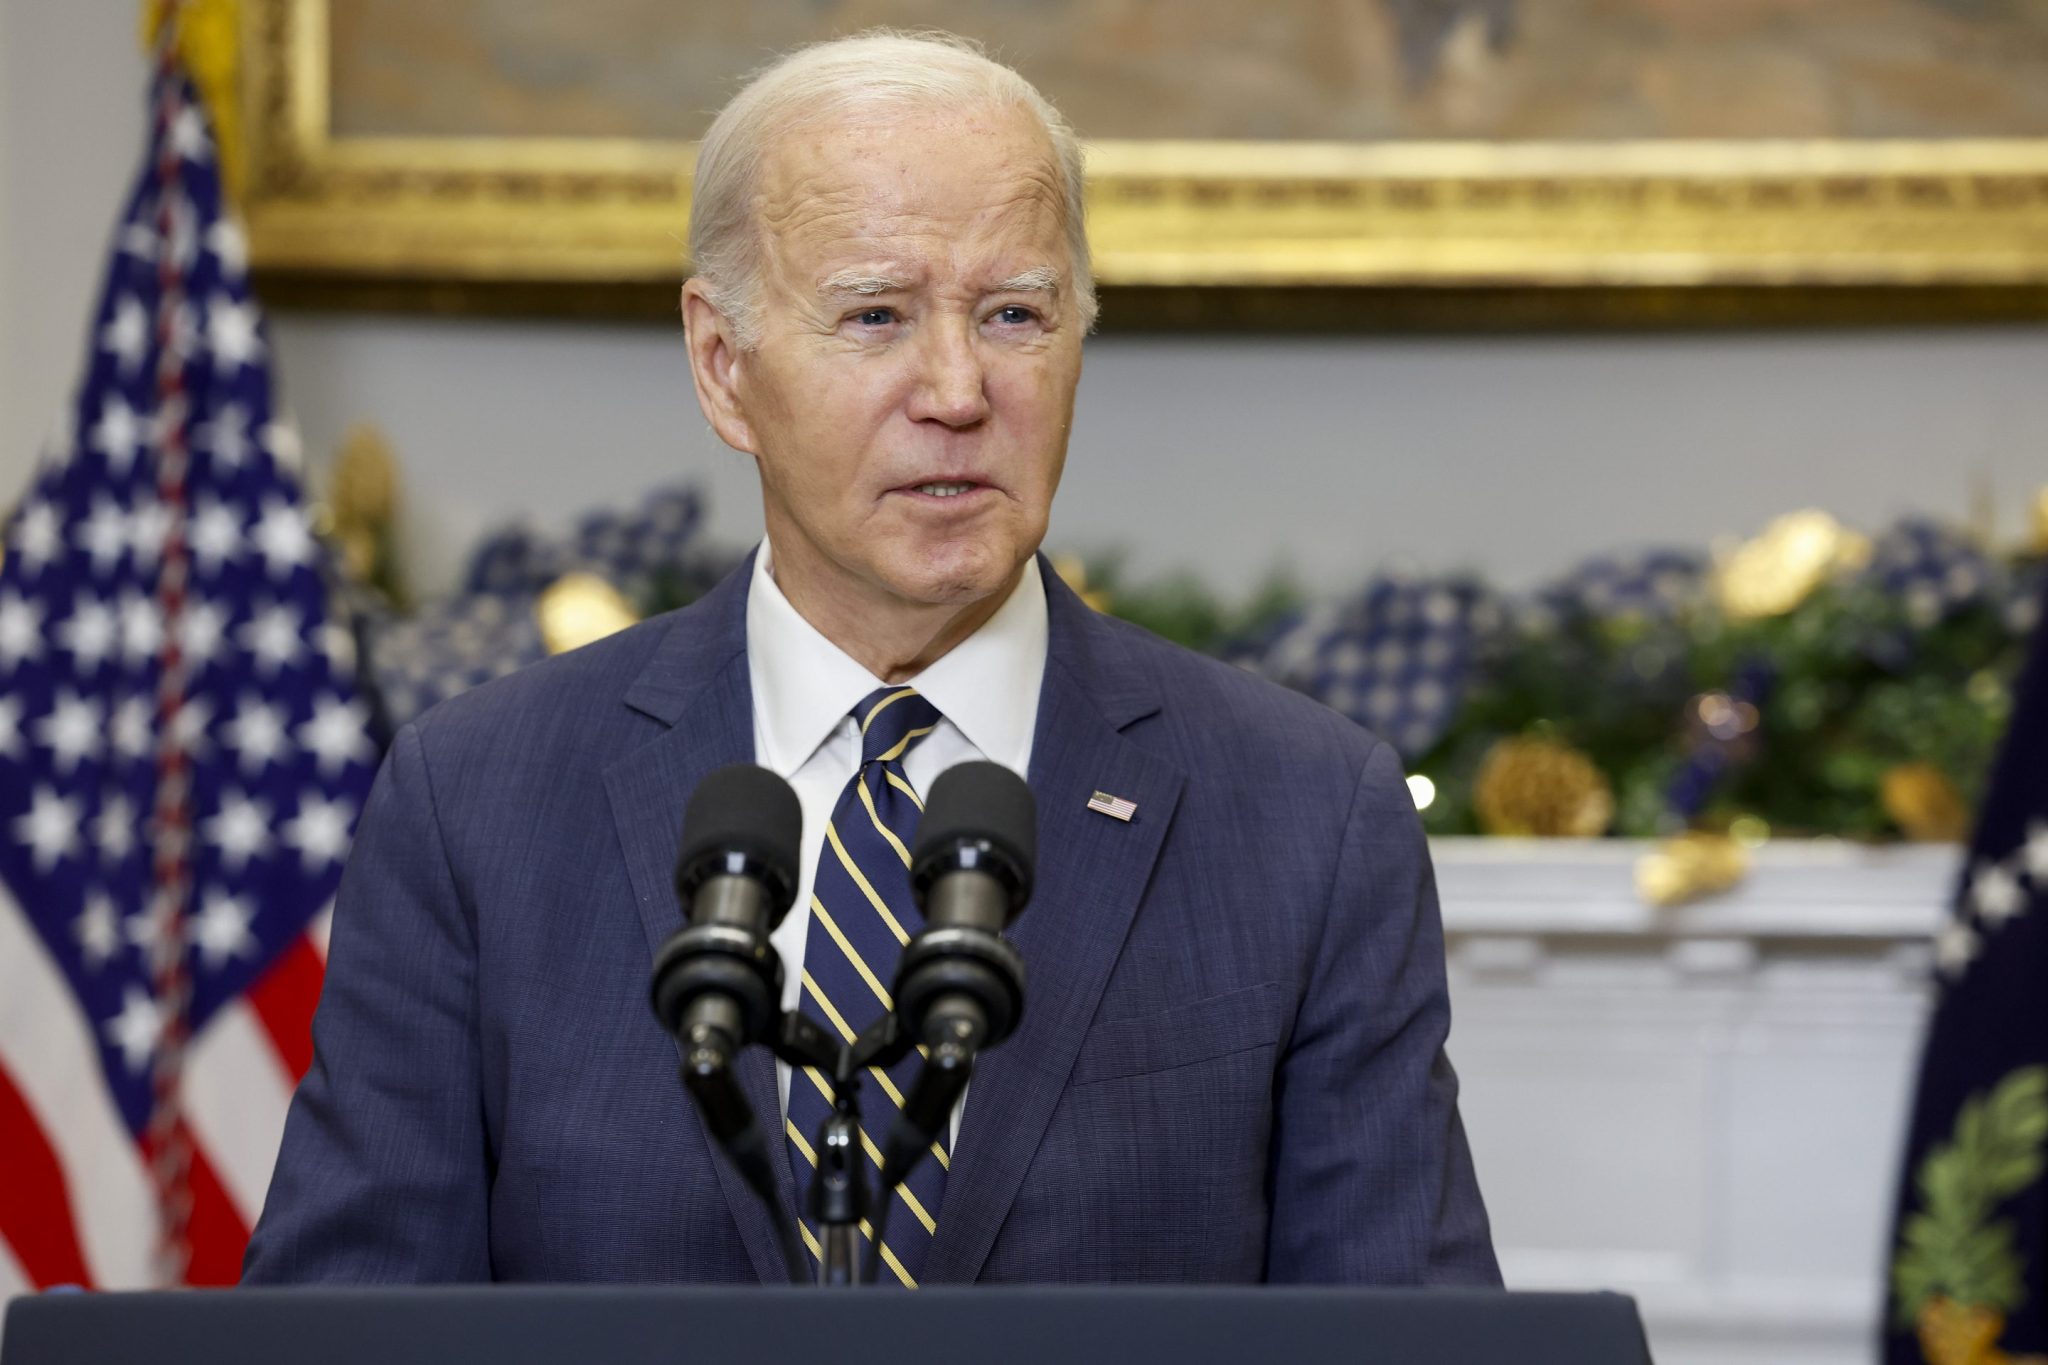 Joe Biden gives a rare take on interest rates by saying the latest jobs numbers show the economy is in a ‘sweep spot’ and that rate hikes aren’t needed